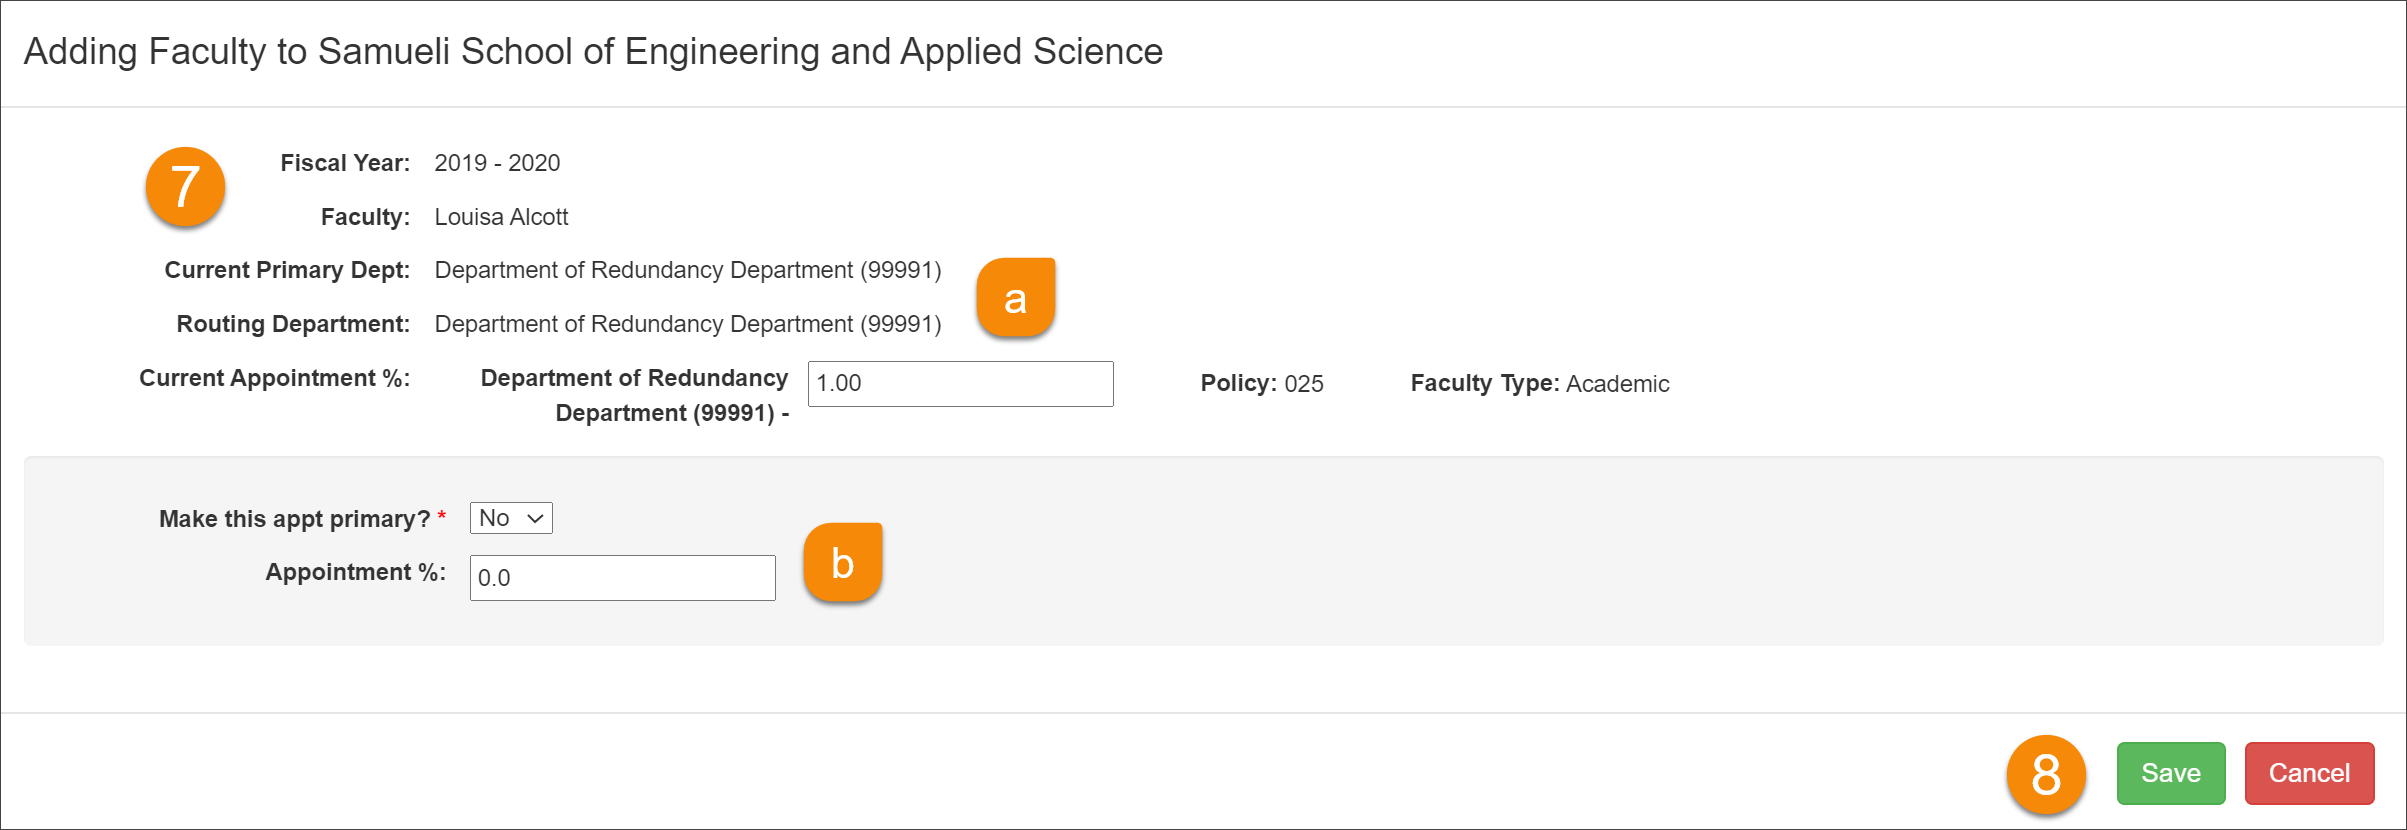 adding a new faculty form